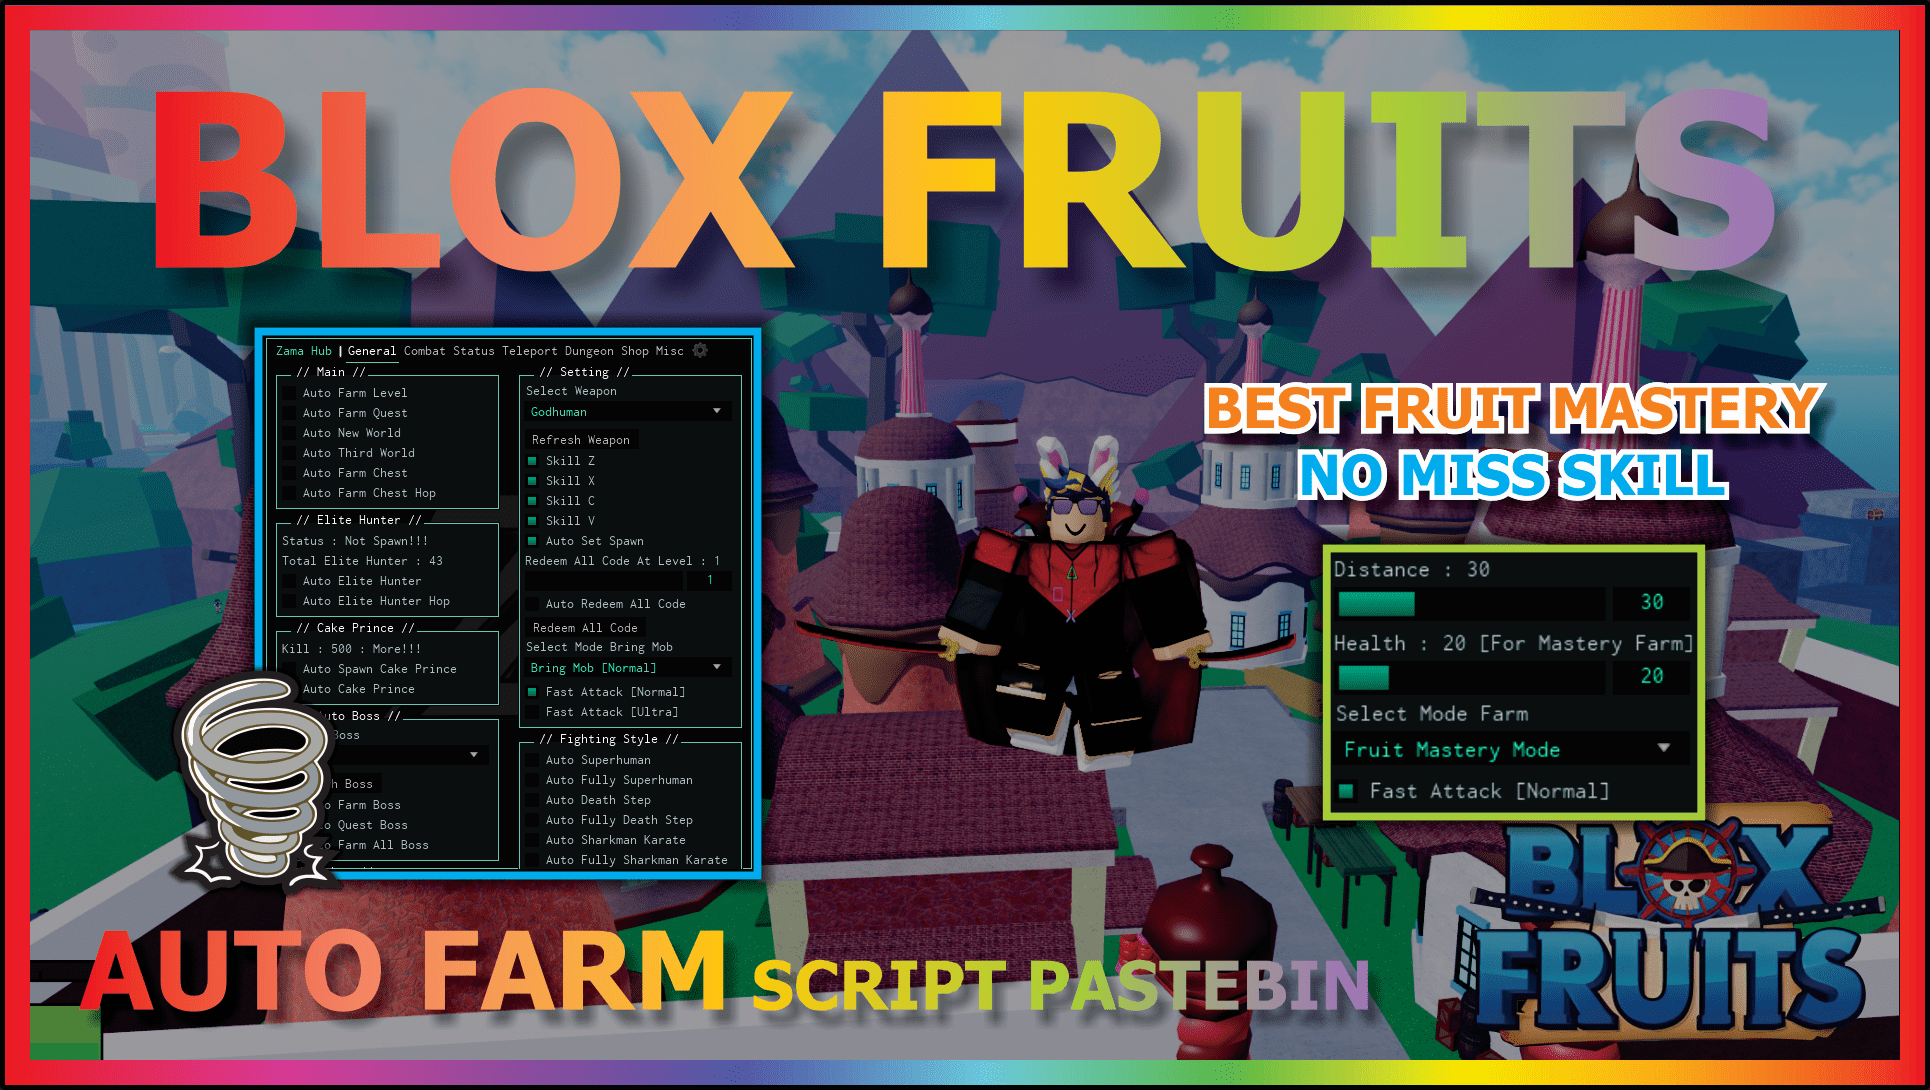 The Best Spot To Auto Farm Mastery And Beli, Blox Fruits